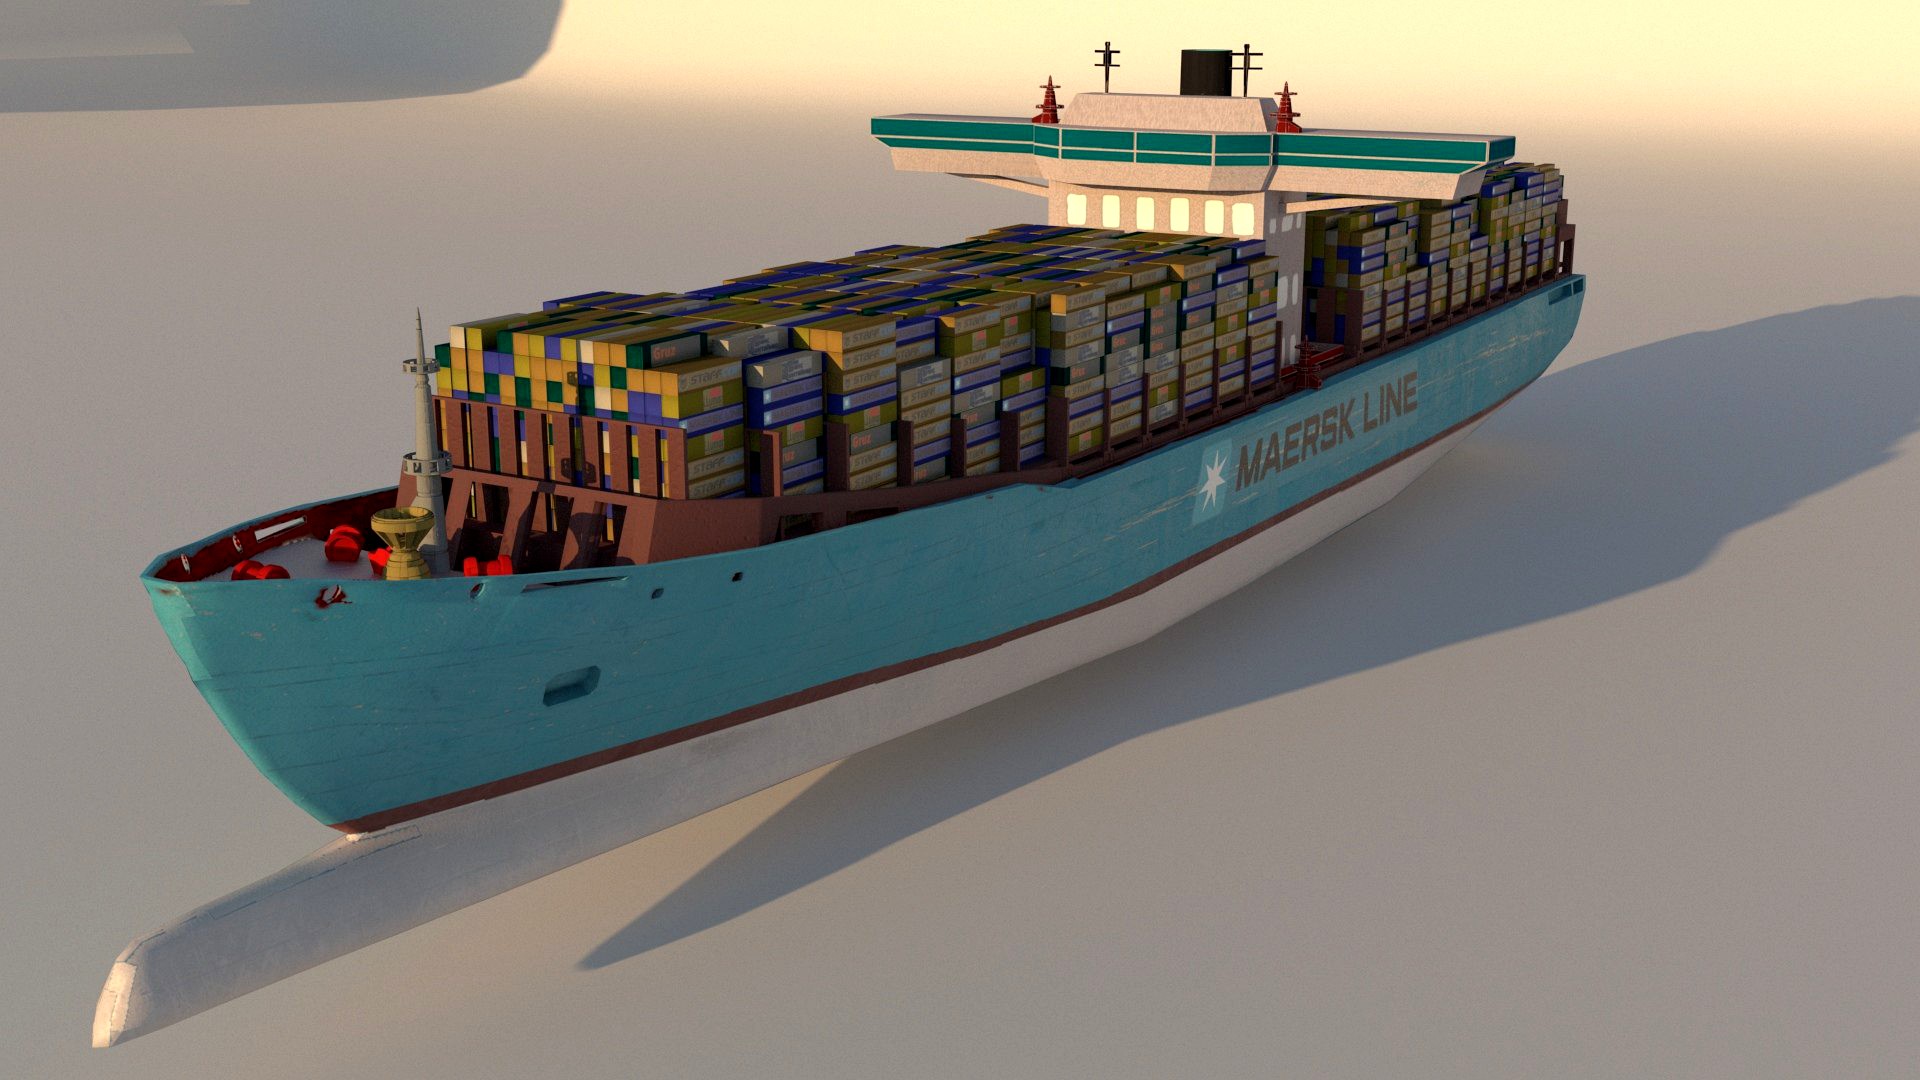 Container Ship Emma Maersk